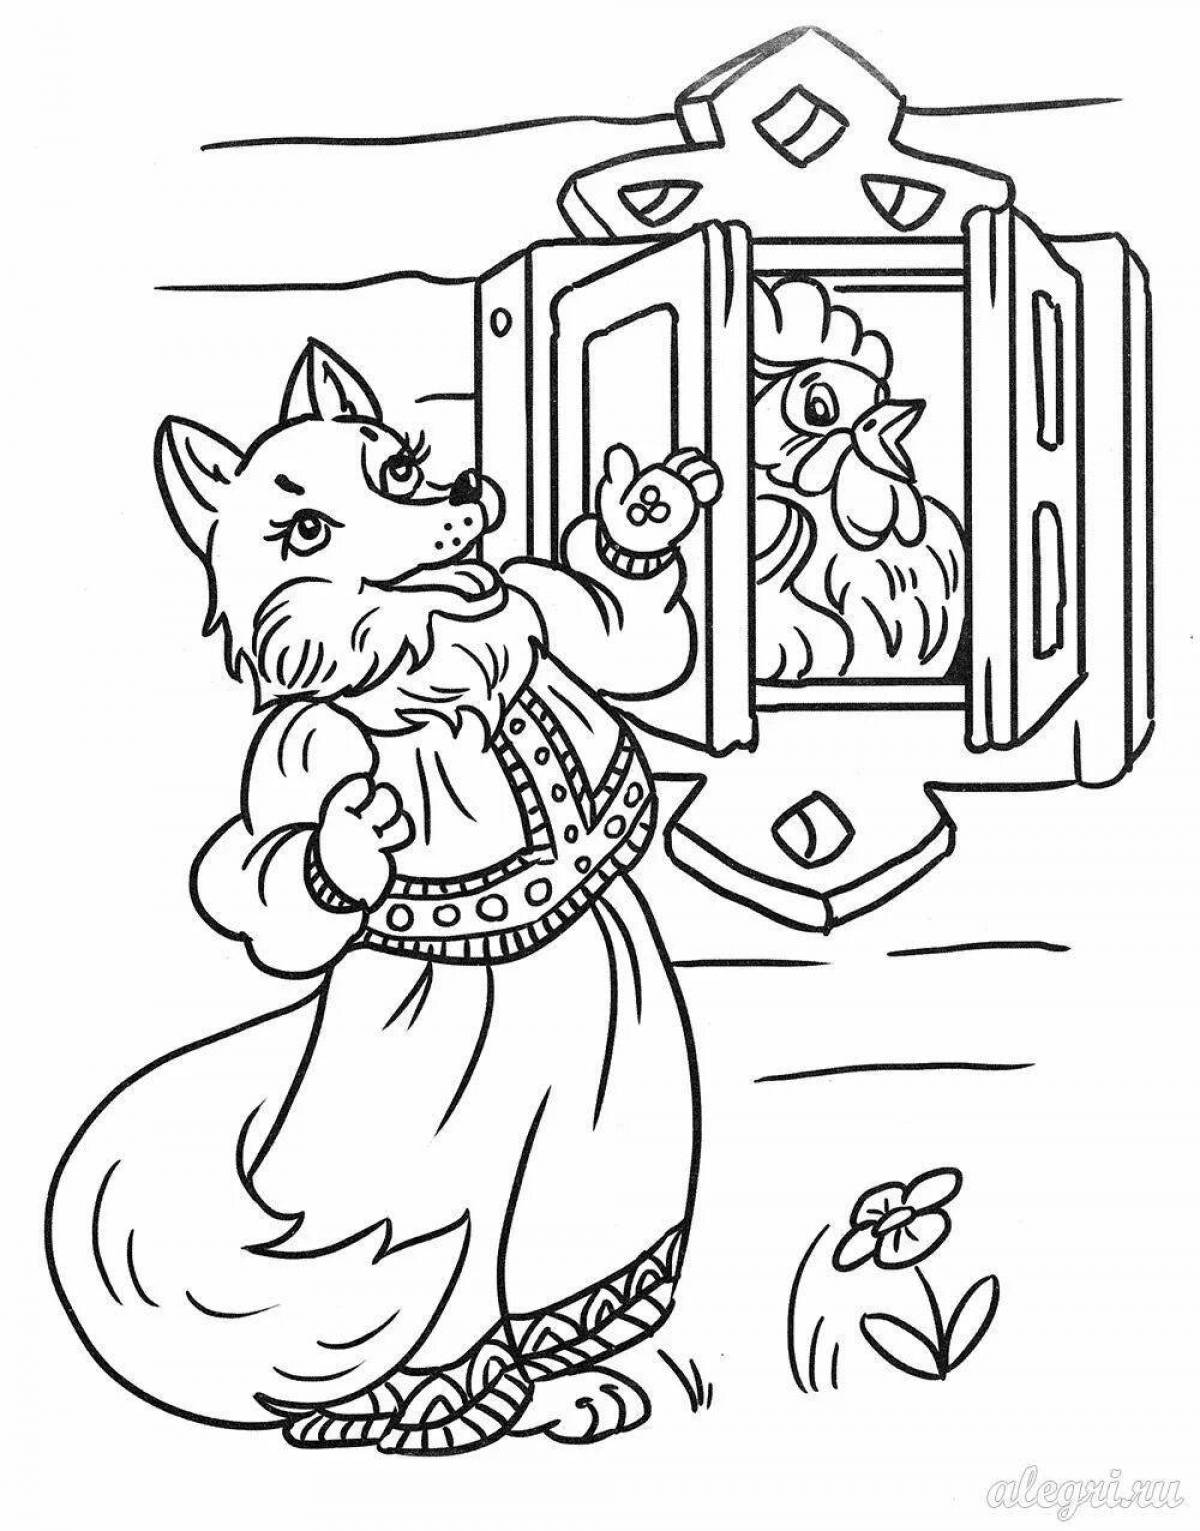 Fabulous fairy tale coloring pages